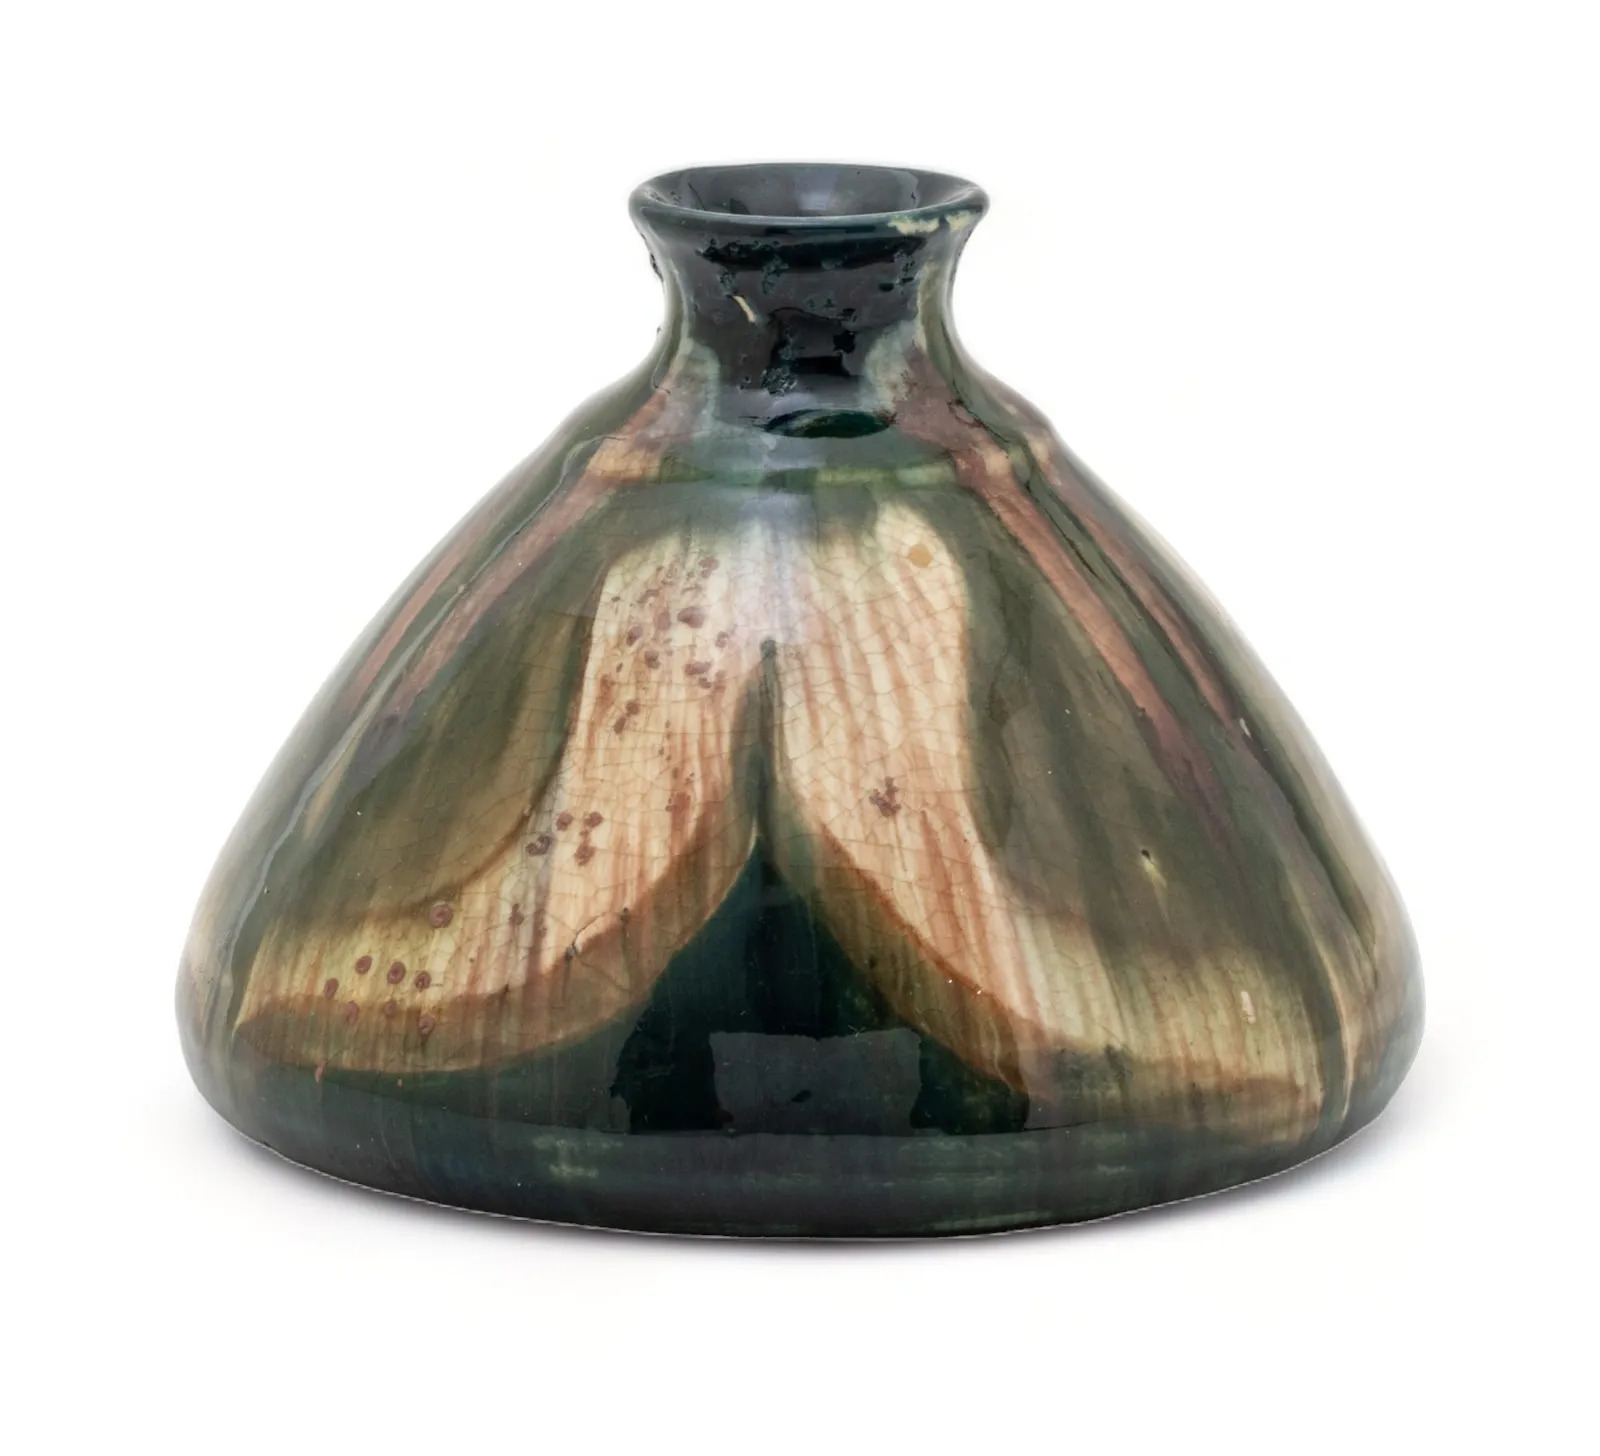 Mary Chase Perry squat lotus leaf vase, which sold for $16,000 ($20,640 with buyer’s premium) at DuMouchelles.